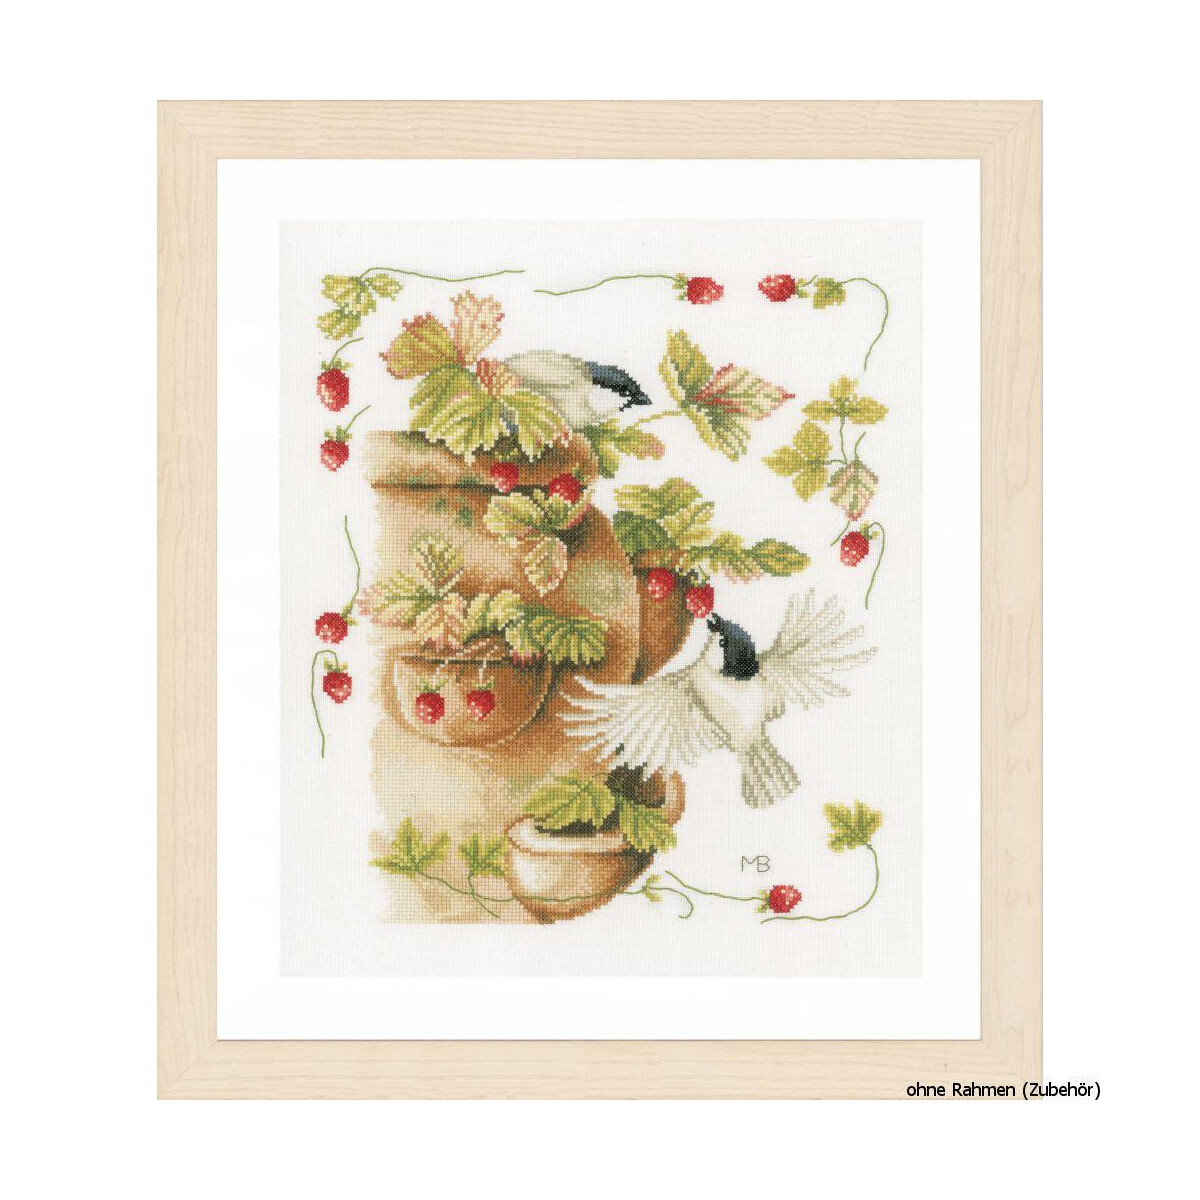 A framed, detailed cross stitch design or embroidery pack...